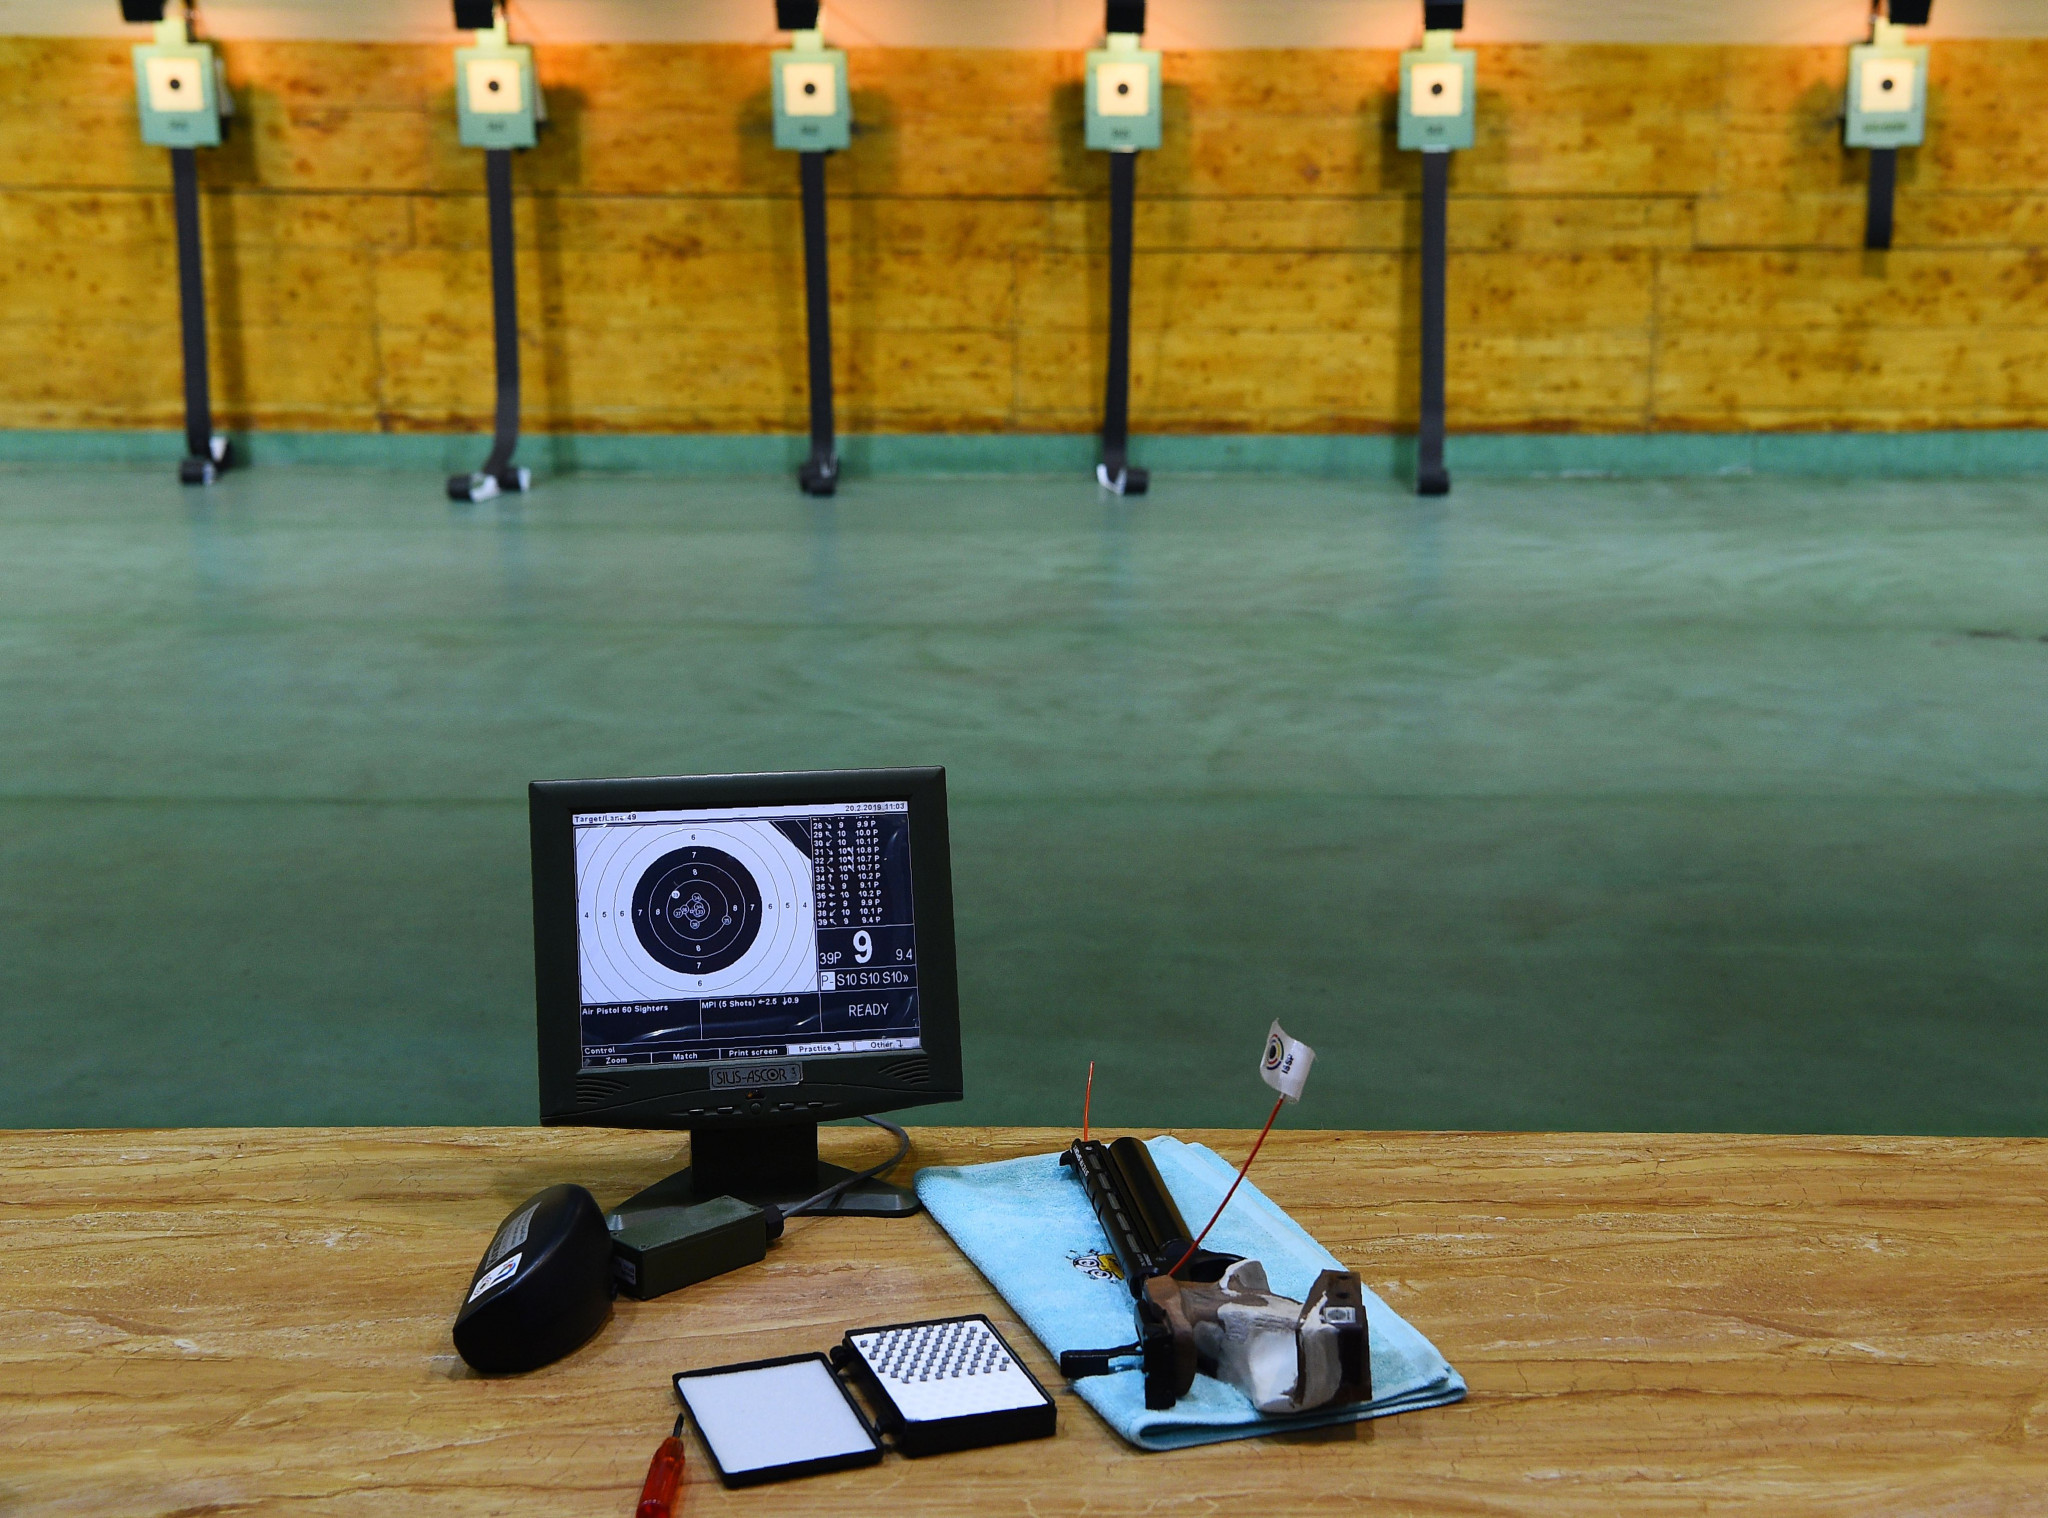 ISSF say World Cup in New Delhi to feature in Tokyo 2020 qualification process